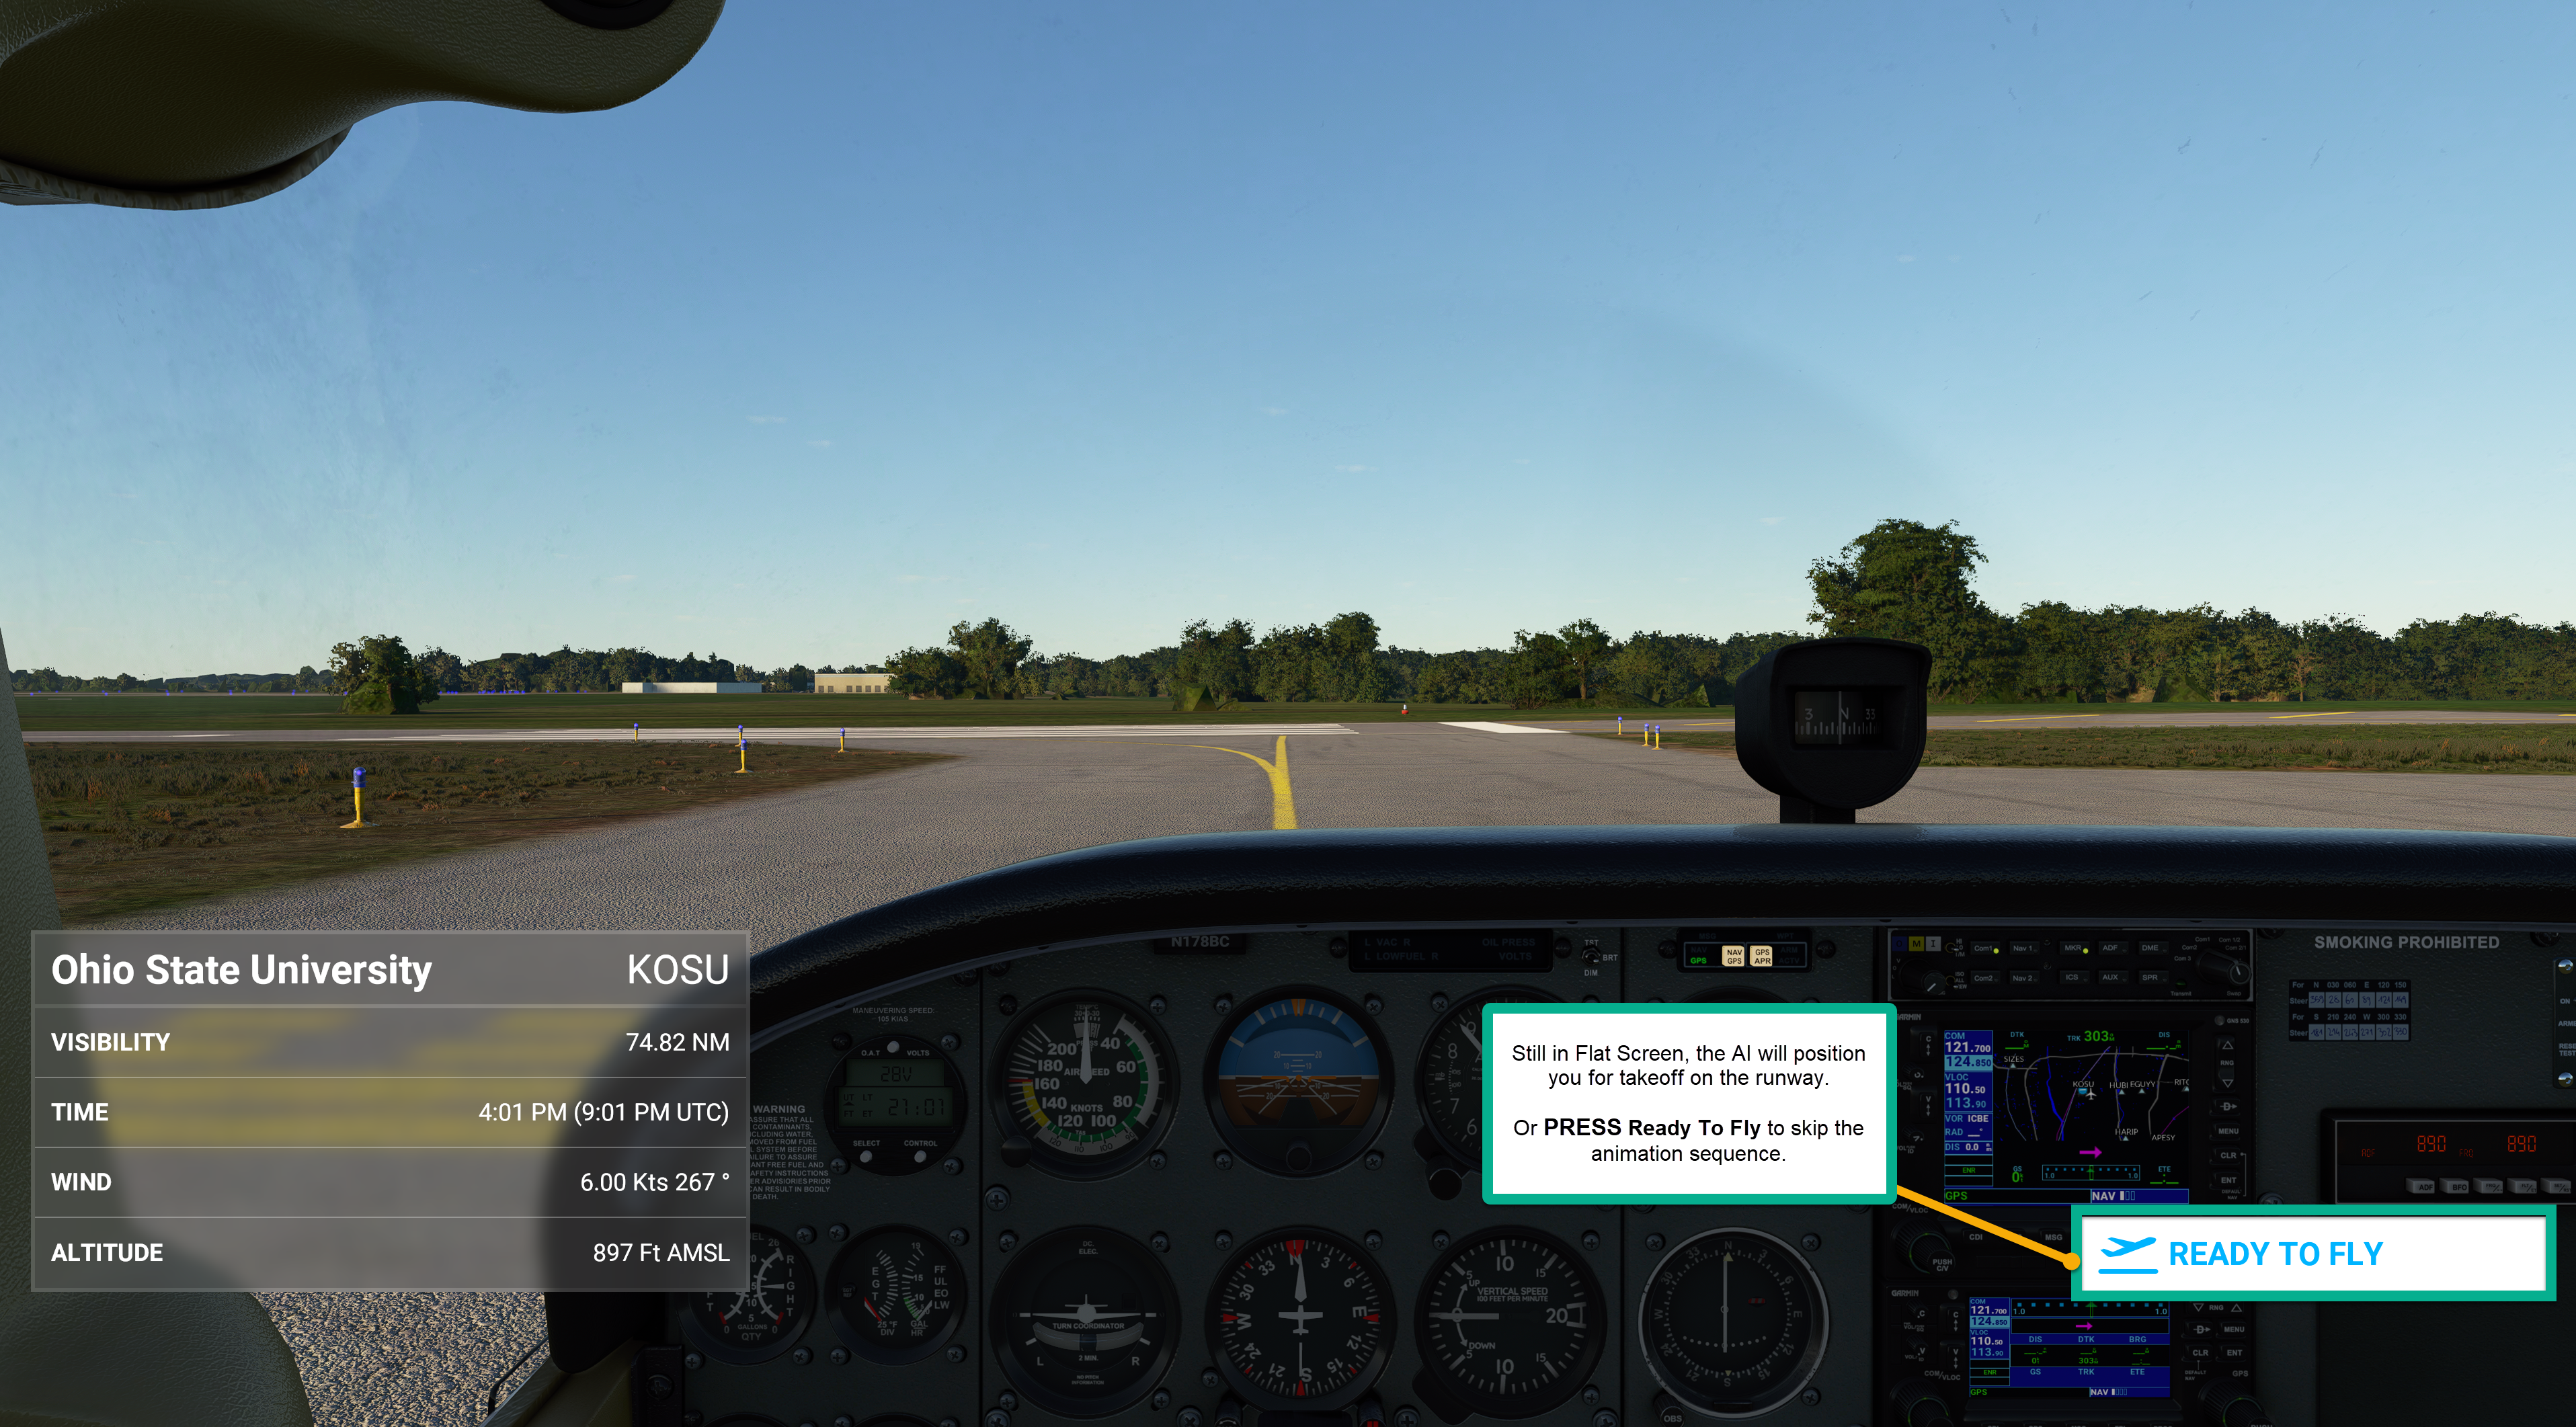 Microsoft Flight Simulator is getting a VR closed beta by early November